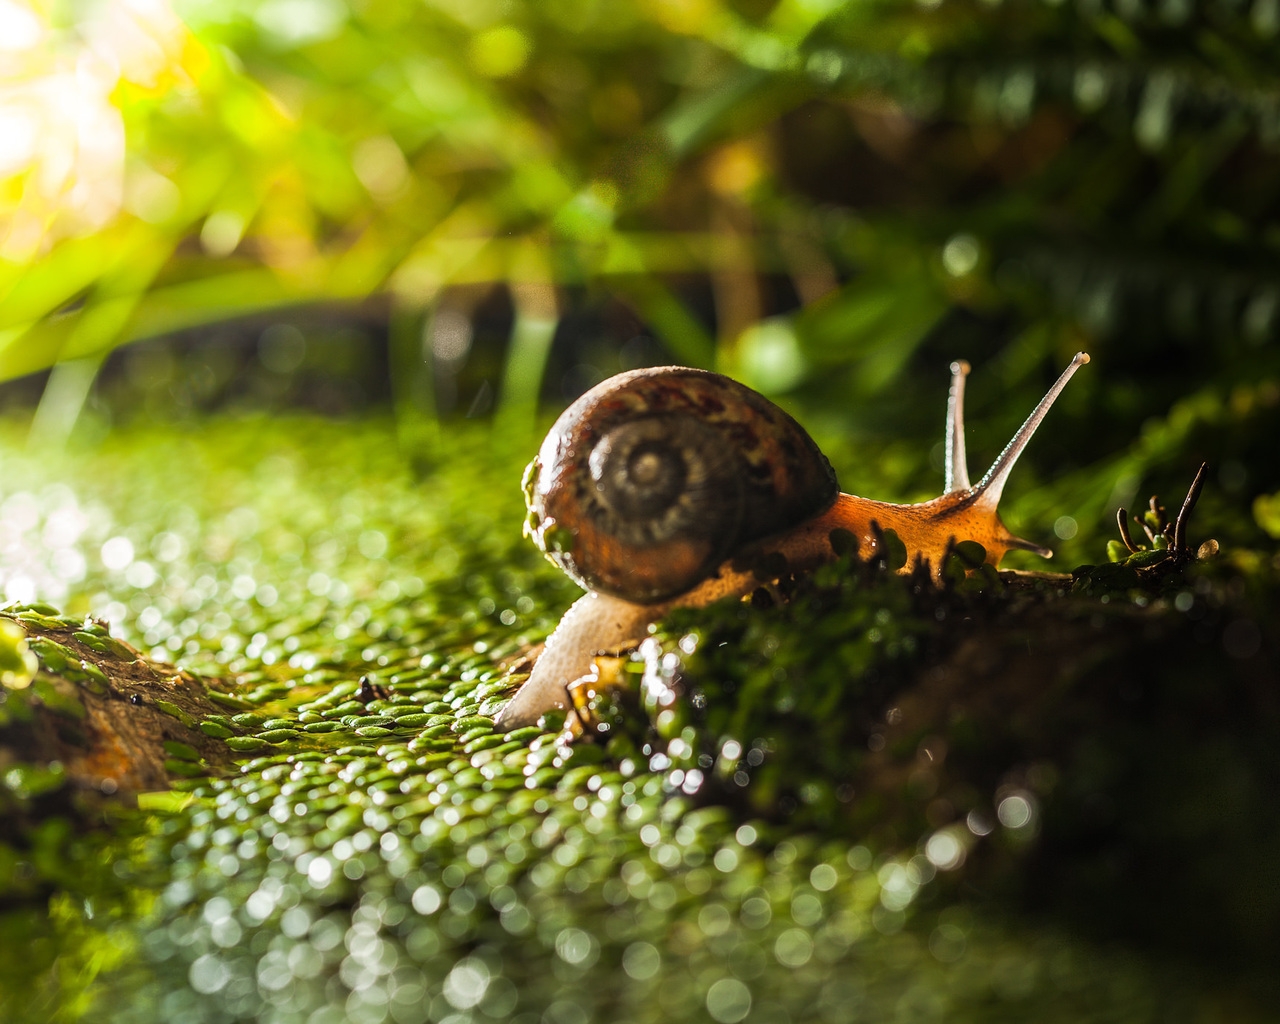 Tiny Snail on Green Grass  for 1280 x 1024 resolution